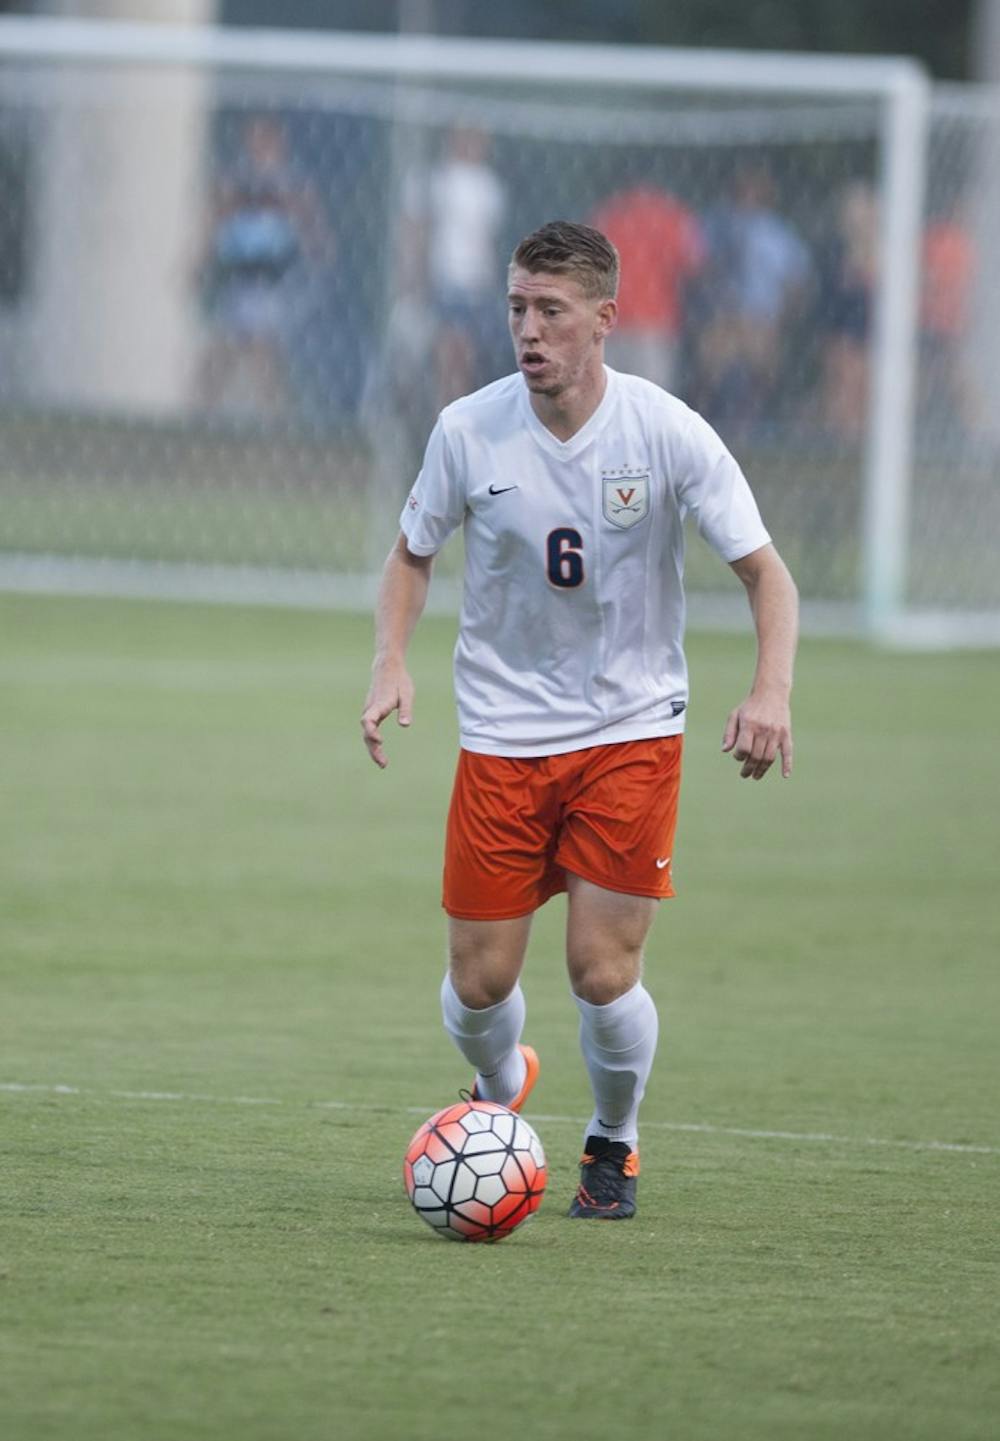 <p>Senior midfielder Scott Thomsen and Virginia look to close out the regular season slate with a victory against conference rival North Carolina Friday night.</p>